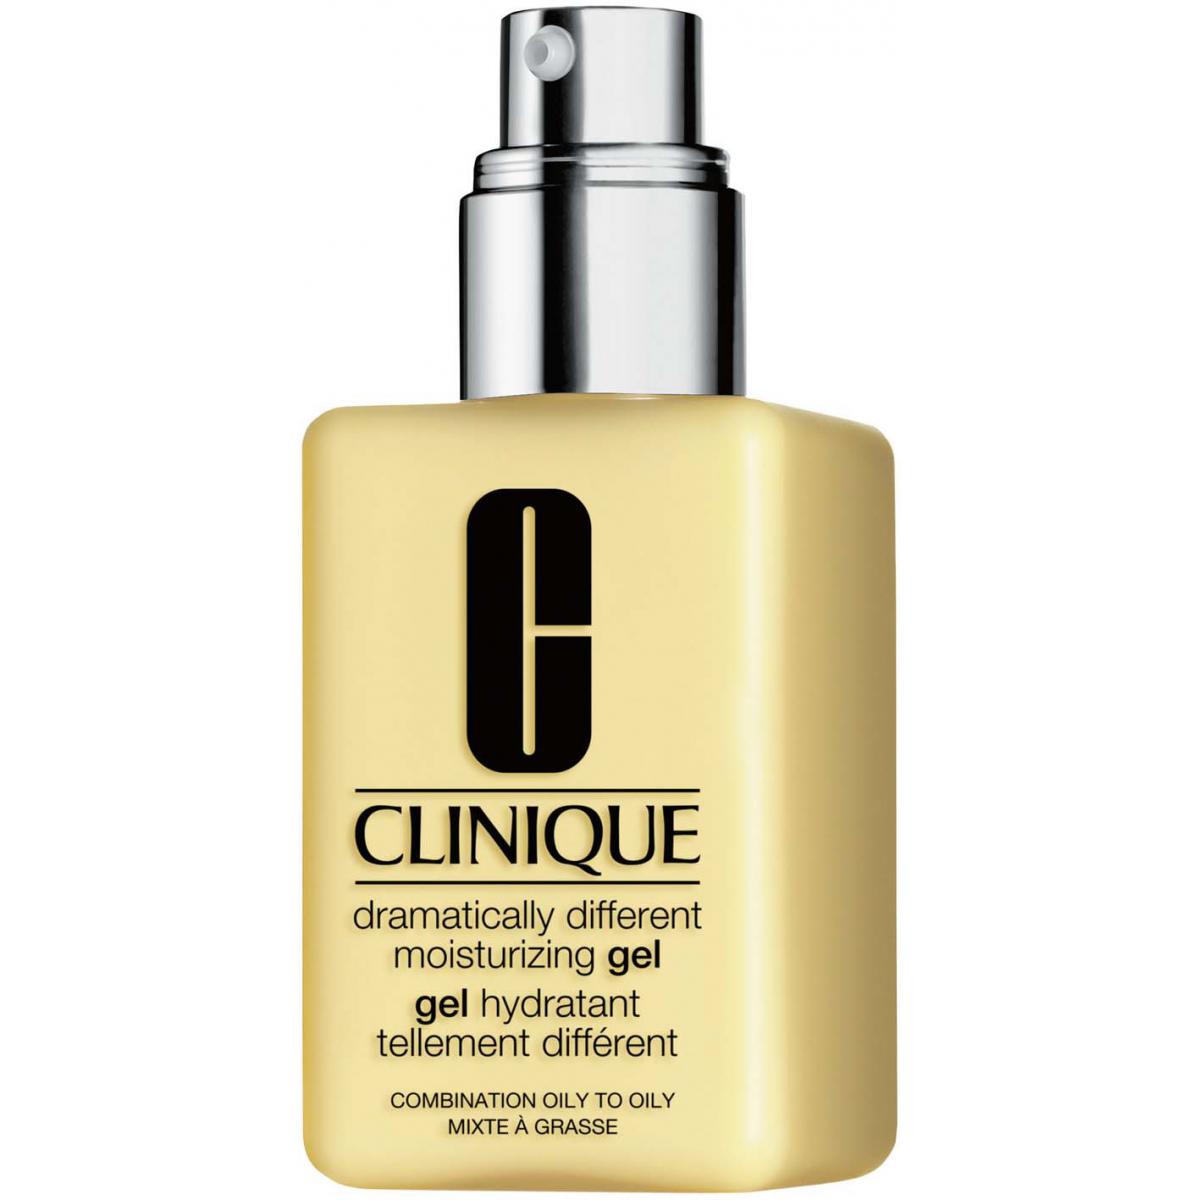 Gel hydratant Clinique Homme